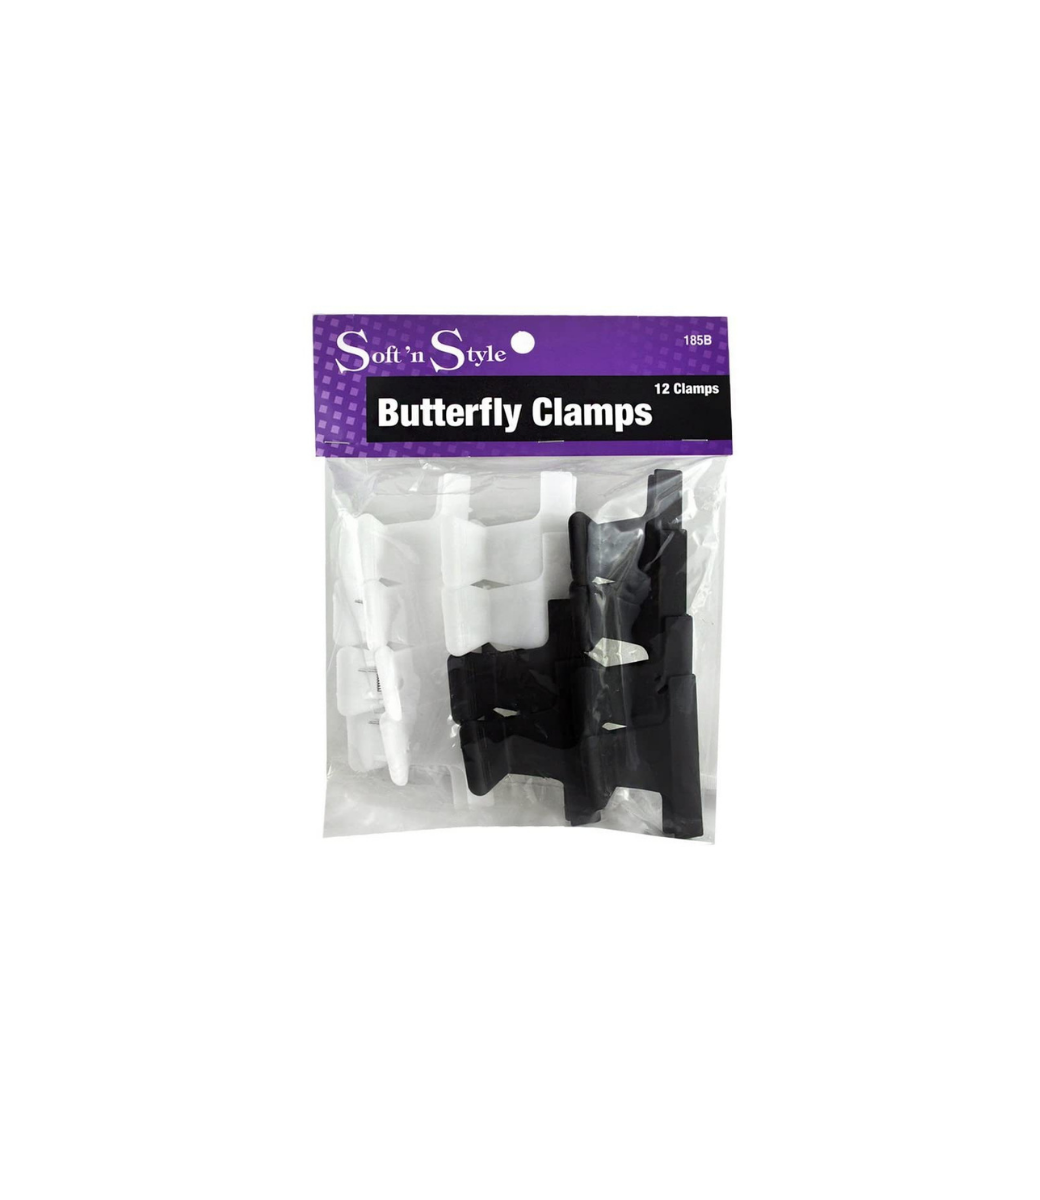 SOFT N STYLE BURMAX - SOFT'N STYLE - Wide Butterfly Clamps 2" - 185B